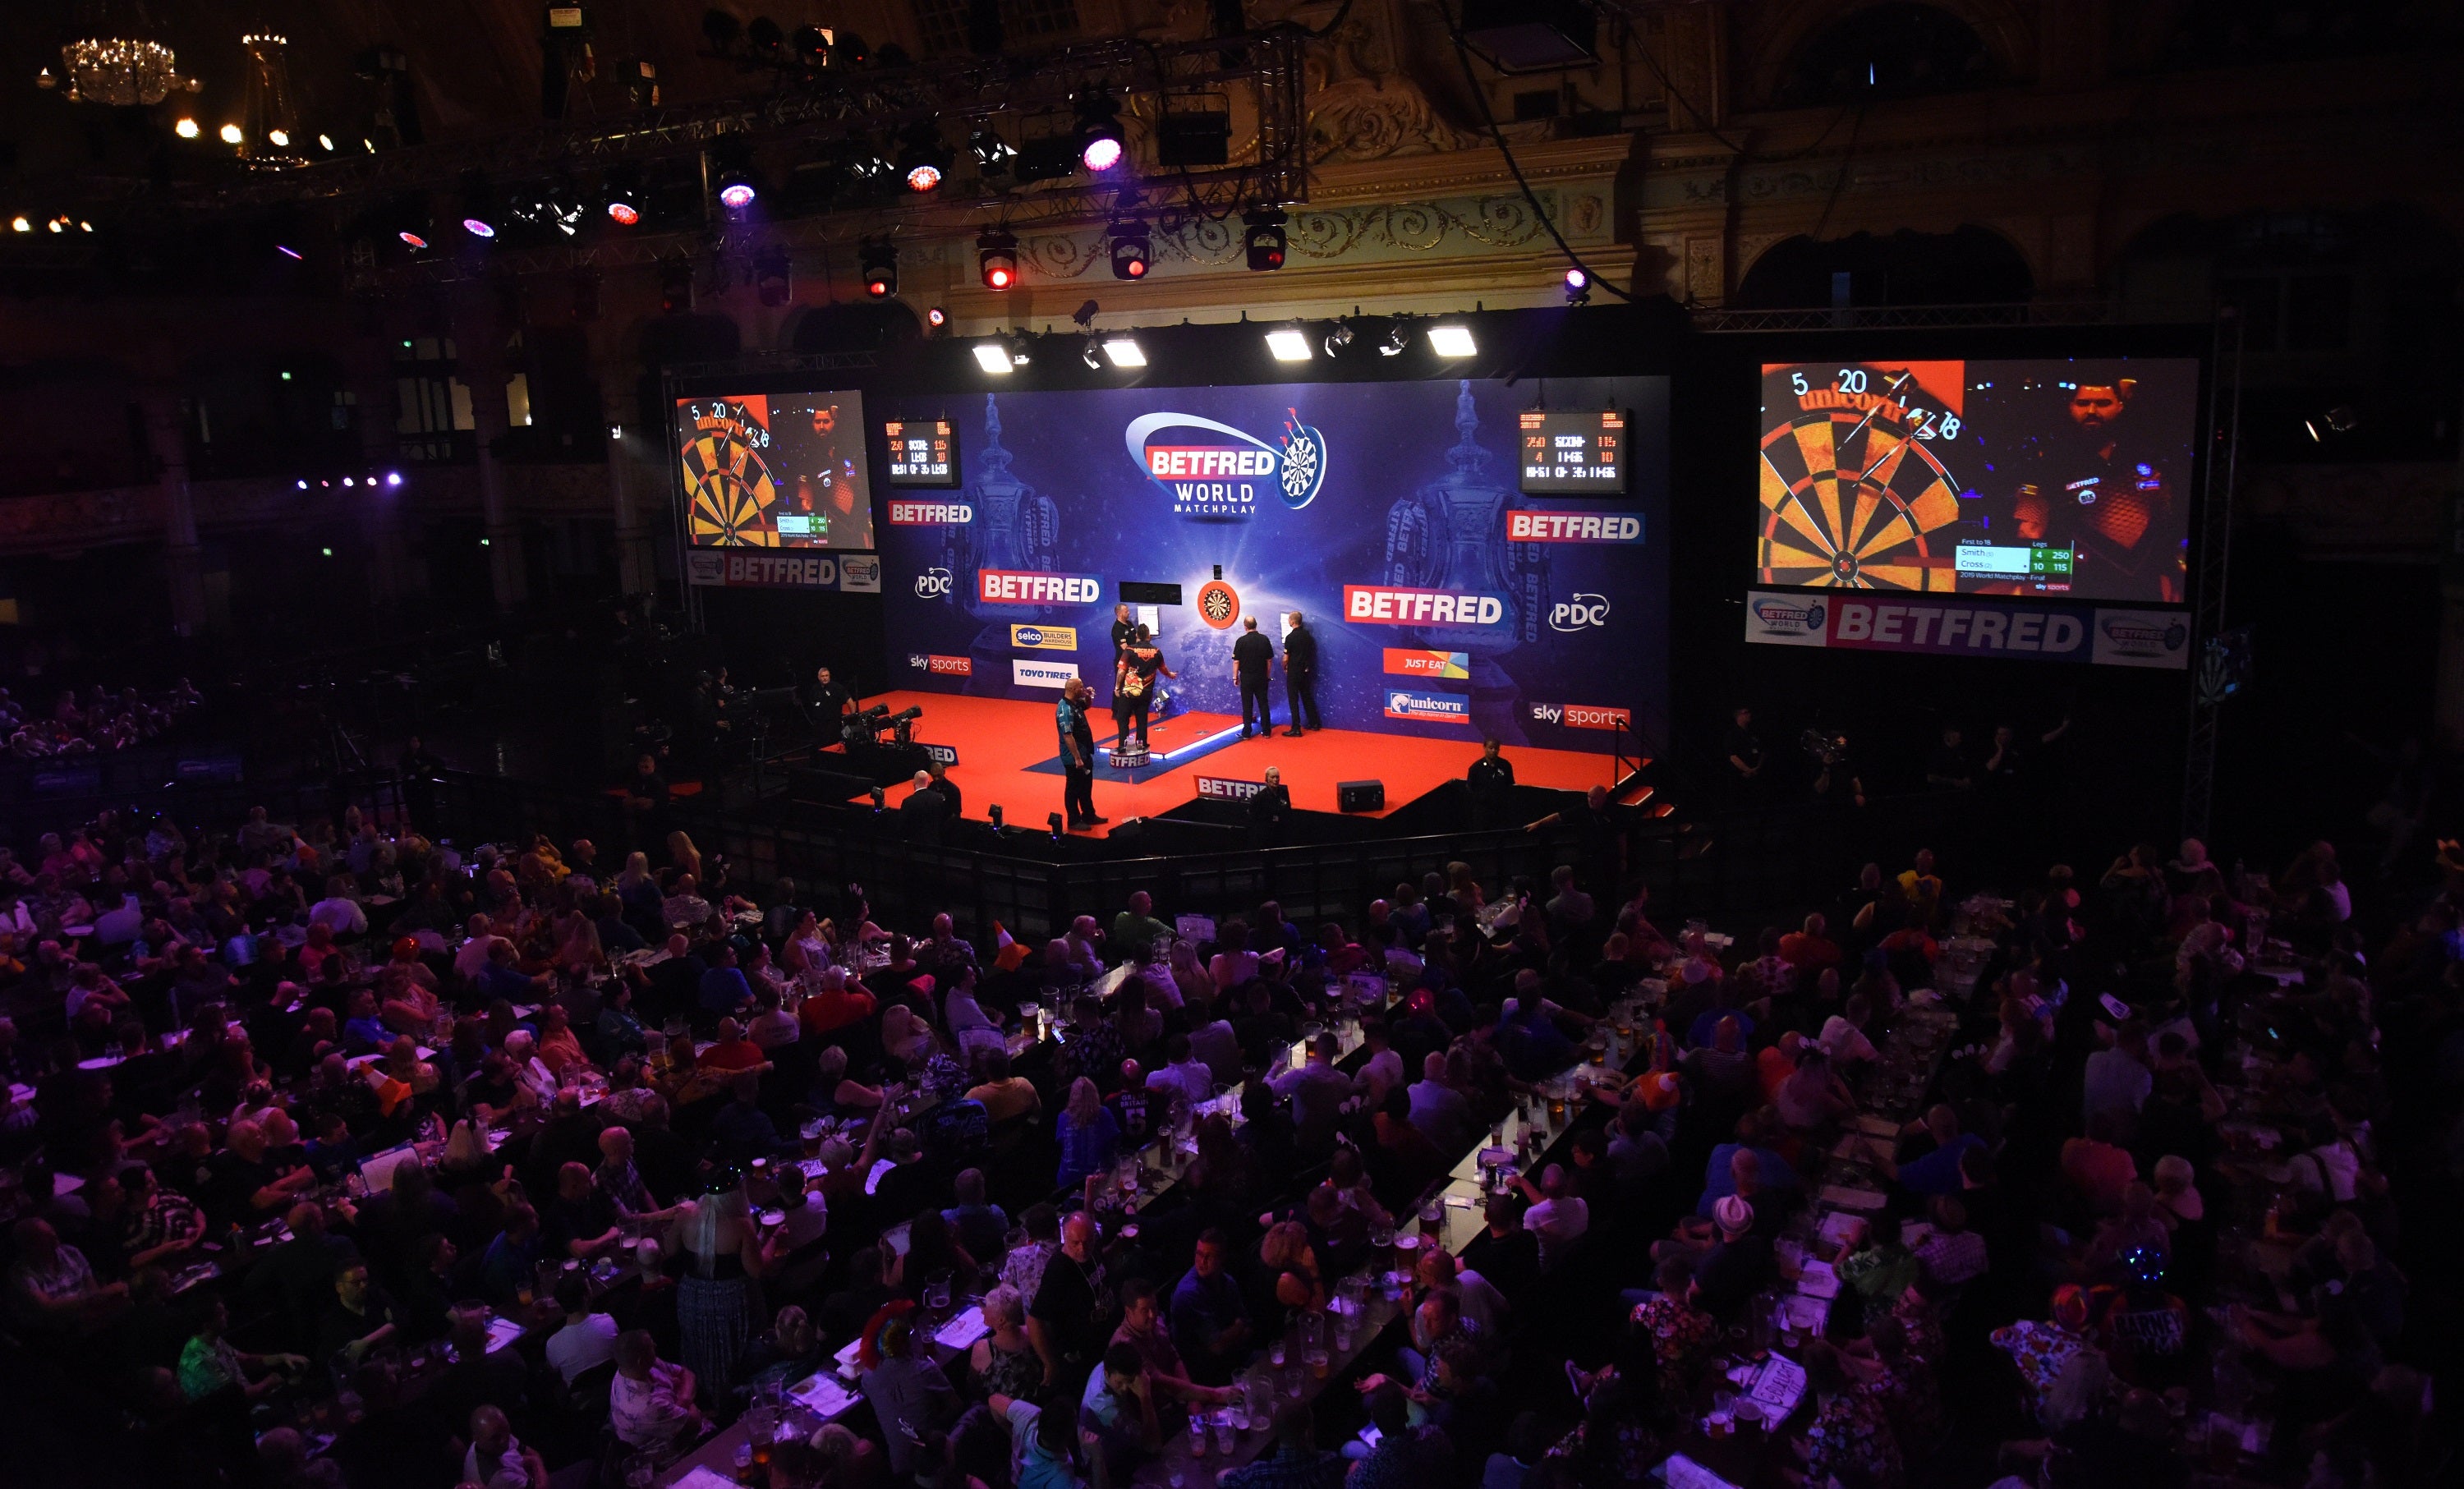 The Winter Gardens will be laid out as they were in 2019 for the Betfred World Matchplay from July 19 onwards